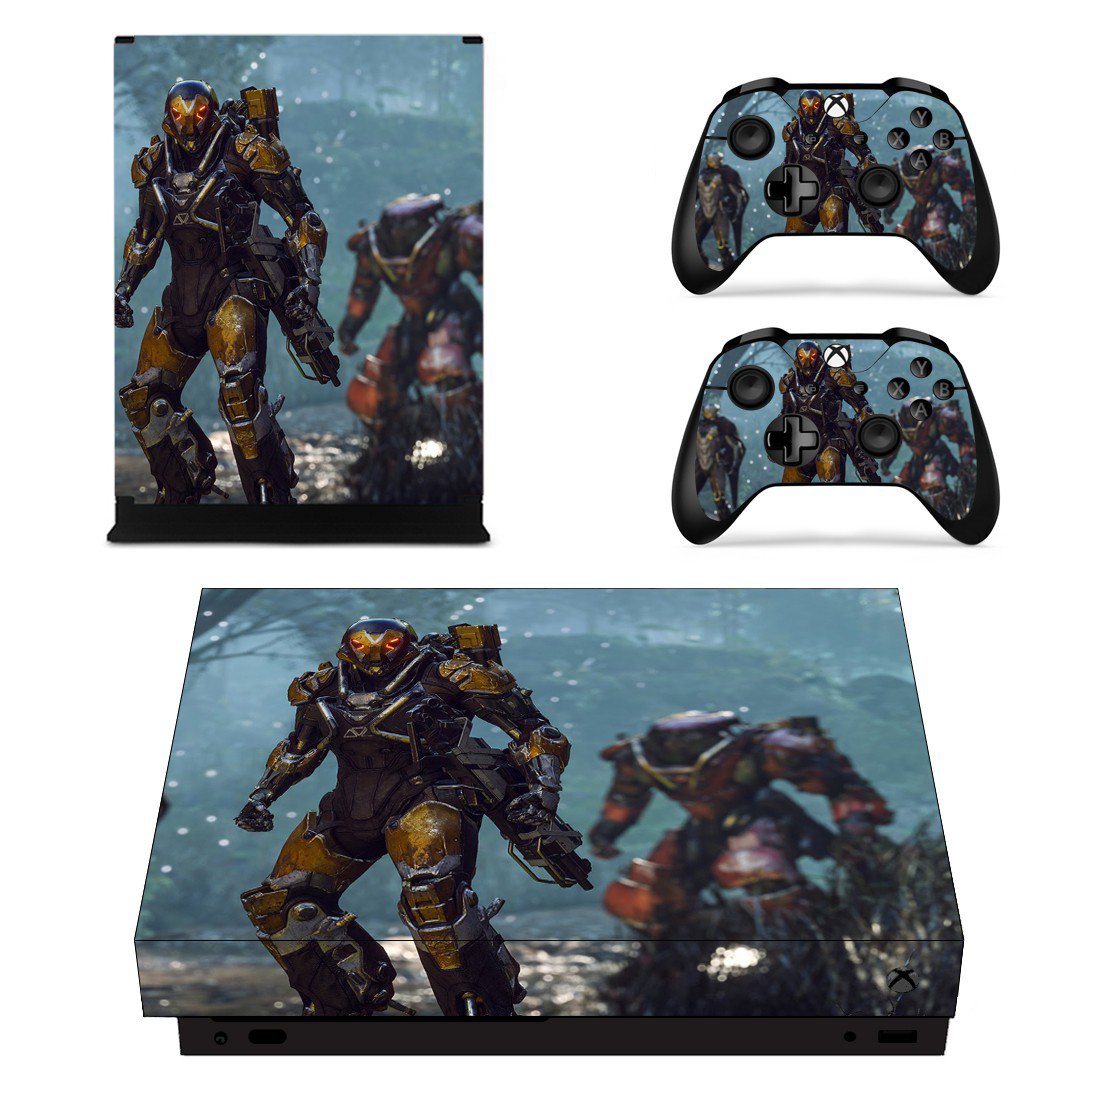 Anthem Decal skin sticker for Xbox One X and Controllers